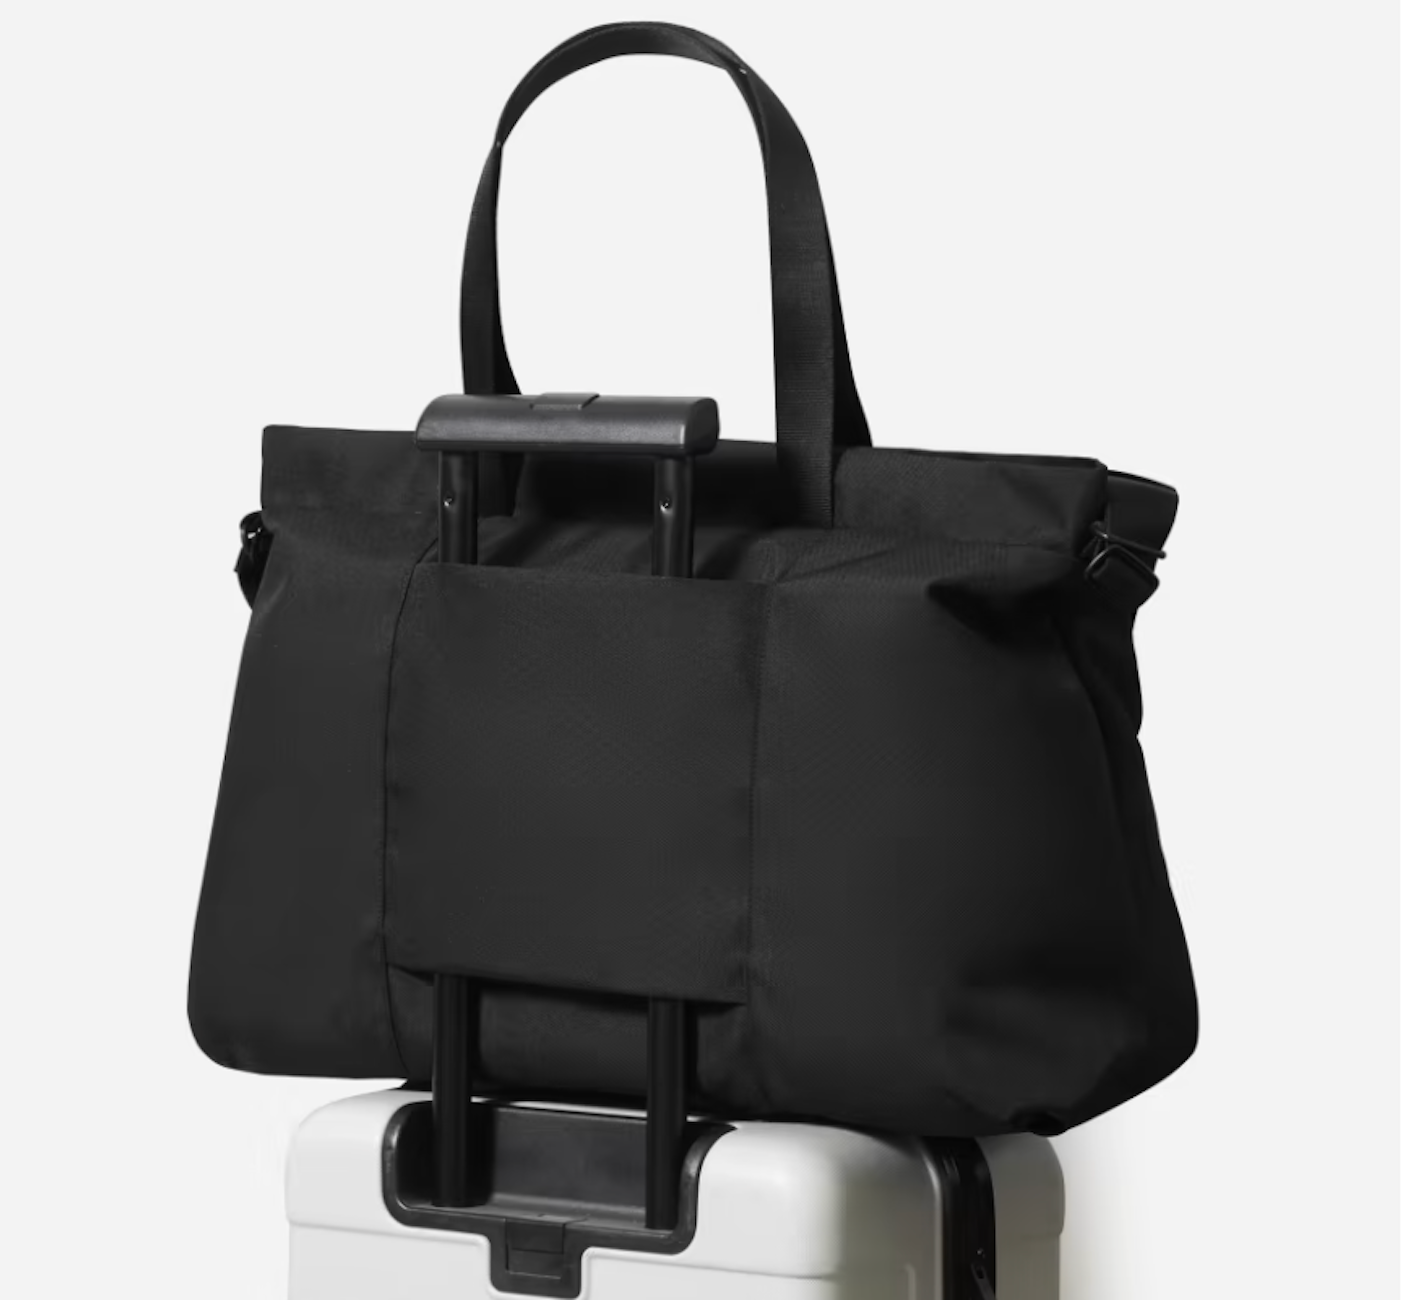 black Everlane duffle bag on top of suitcase